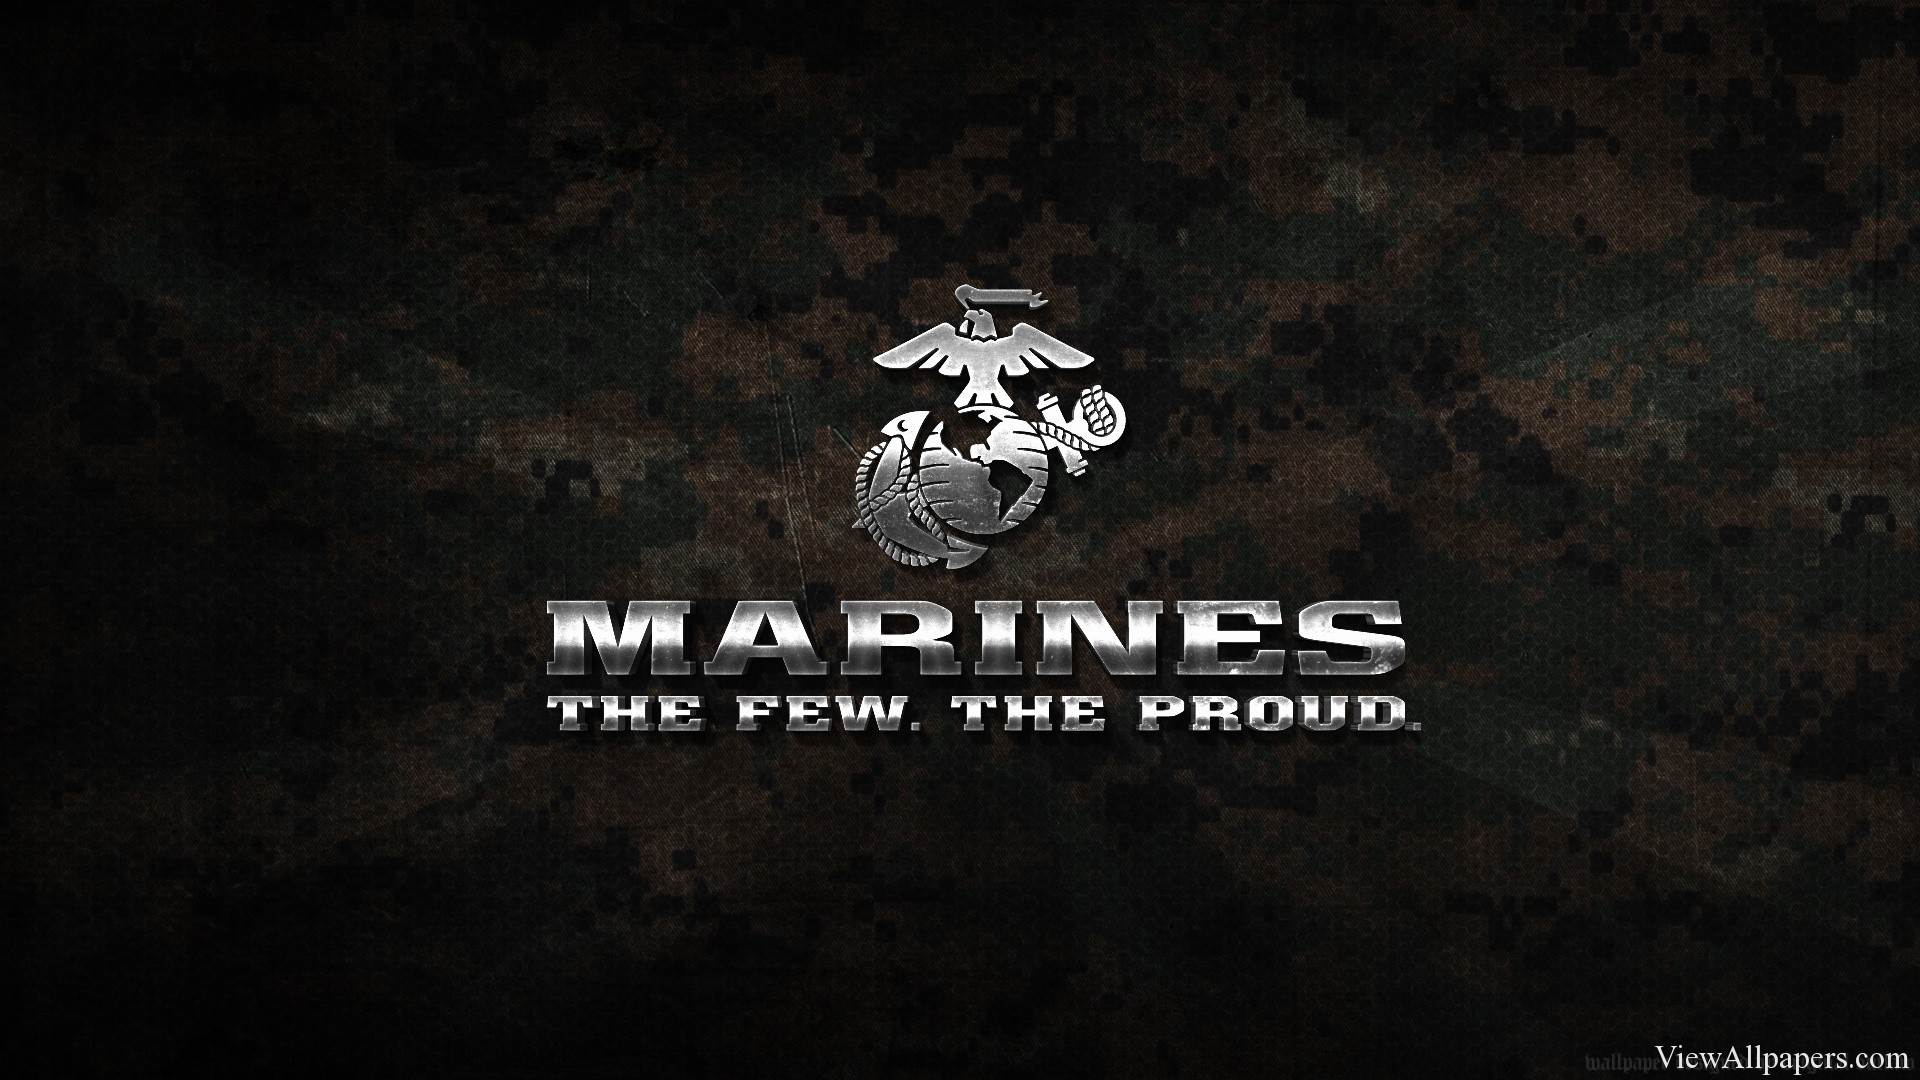 1920x1080 Marine Corps Logo High Resolution, Free download Marine Corps Logo For .